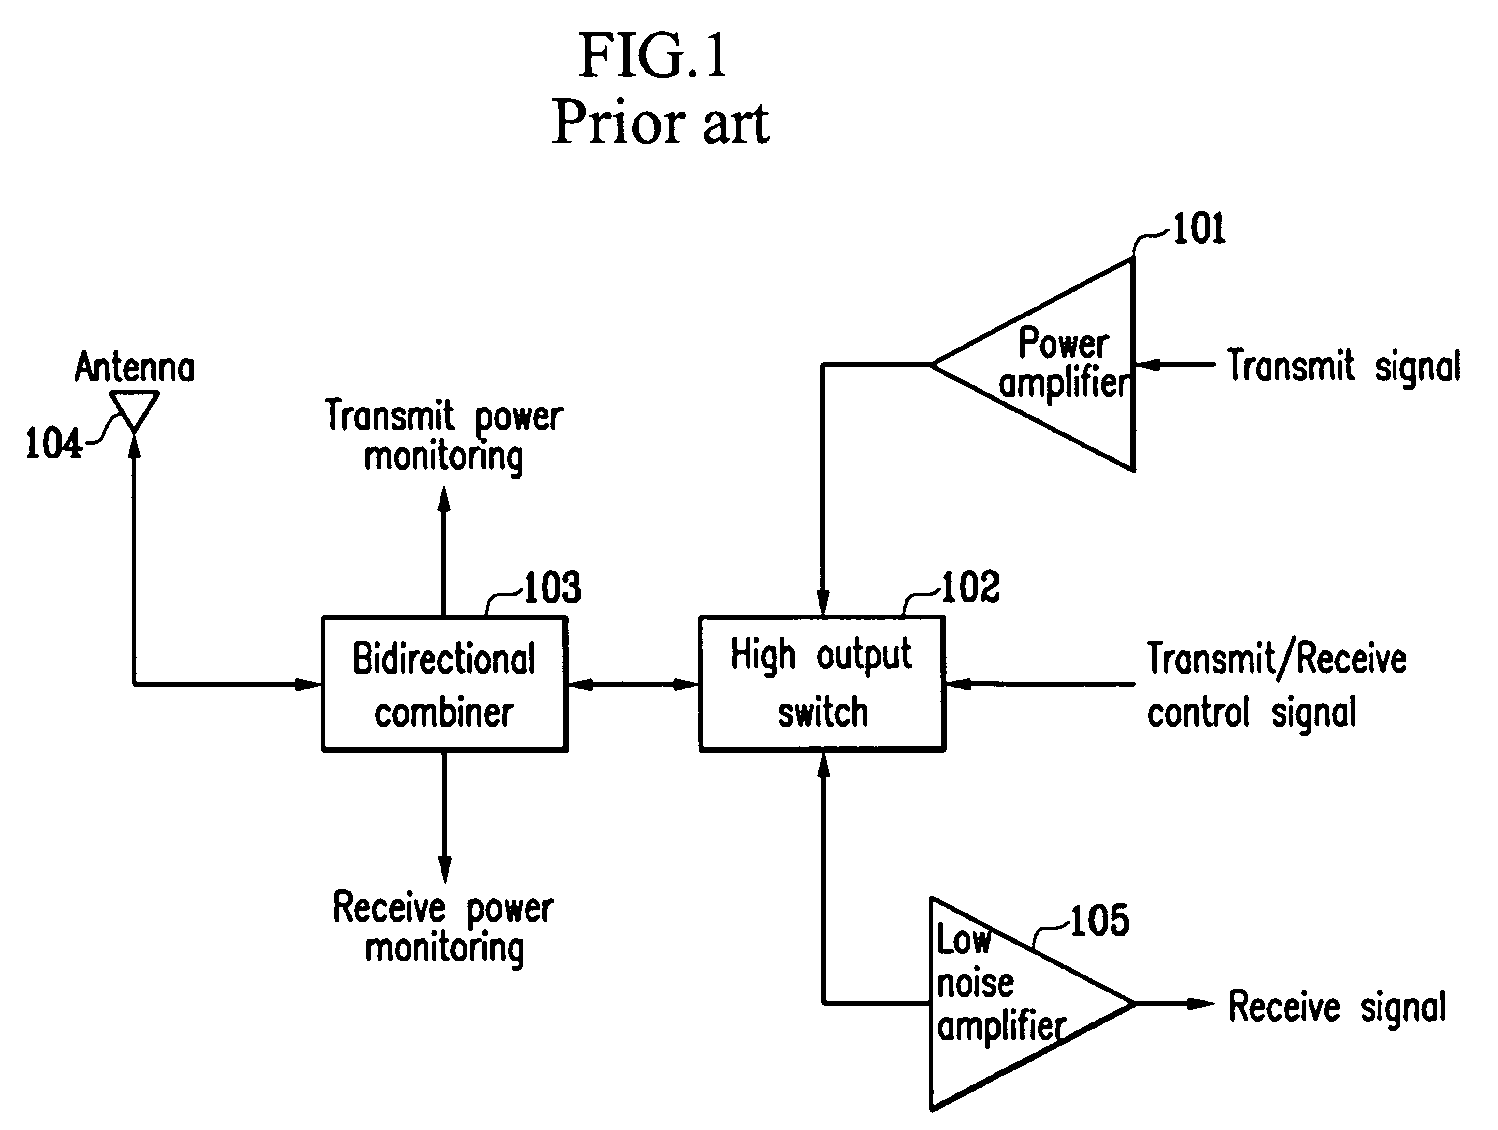 Apparatus and method for separating transmit and receive signals for time division duplexing radio system